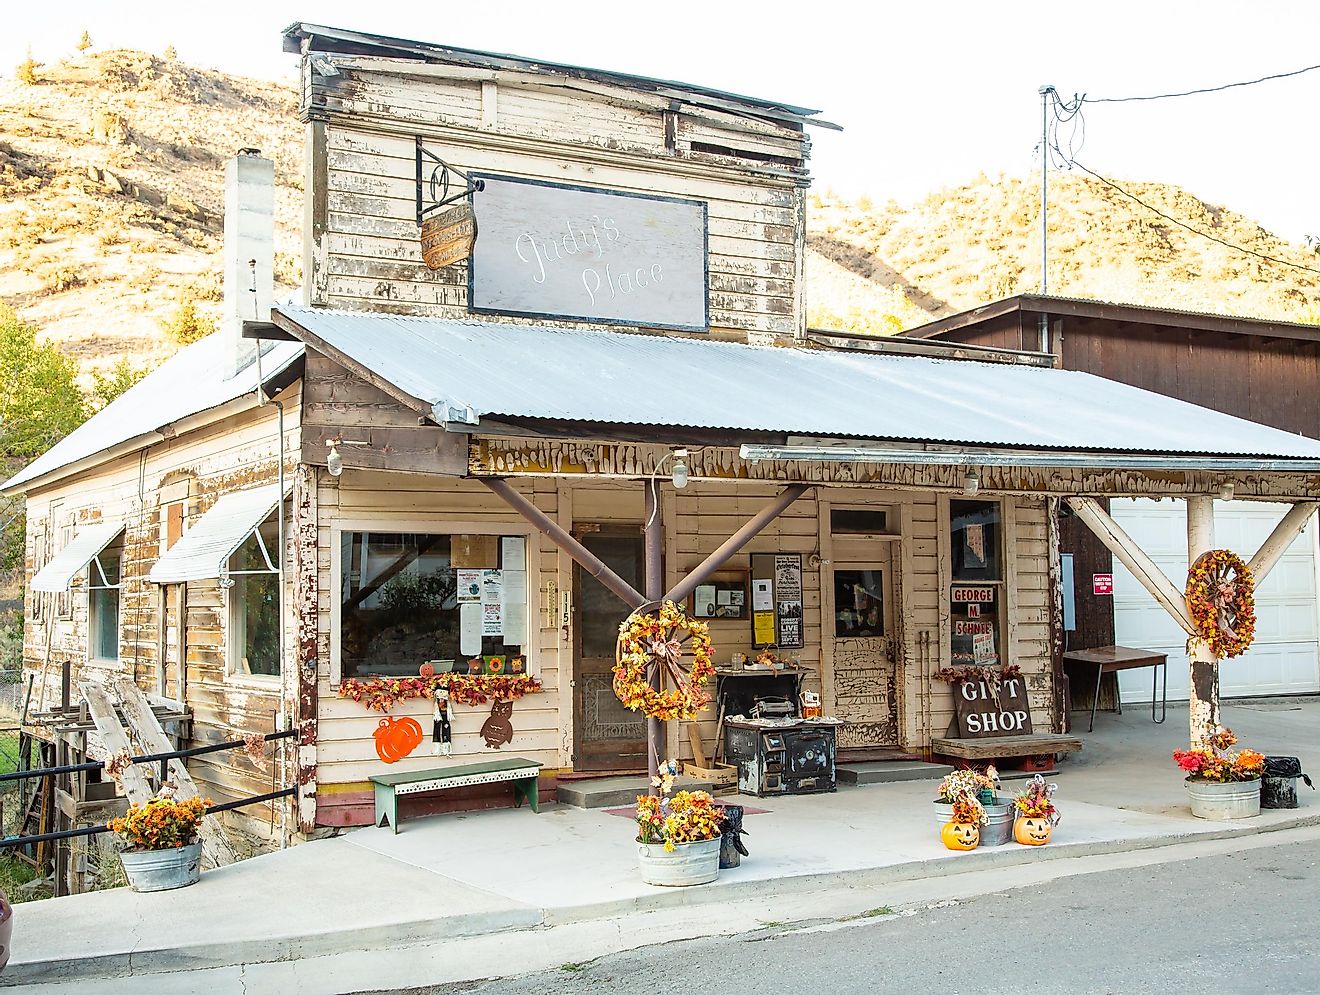 Mitchell, Oregon - 9/16/2018: A gift shop and general store located on the main street of Mitchell,